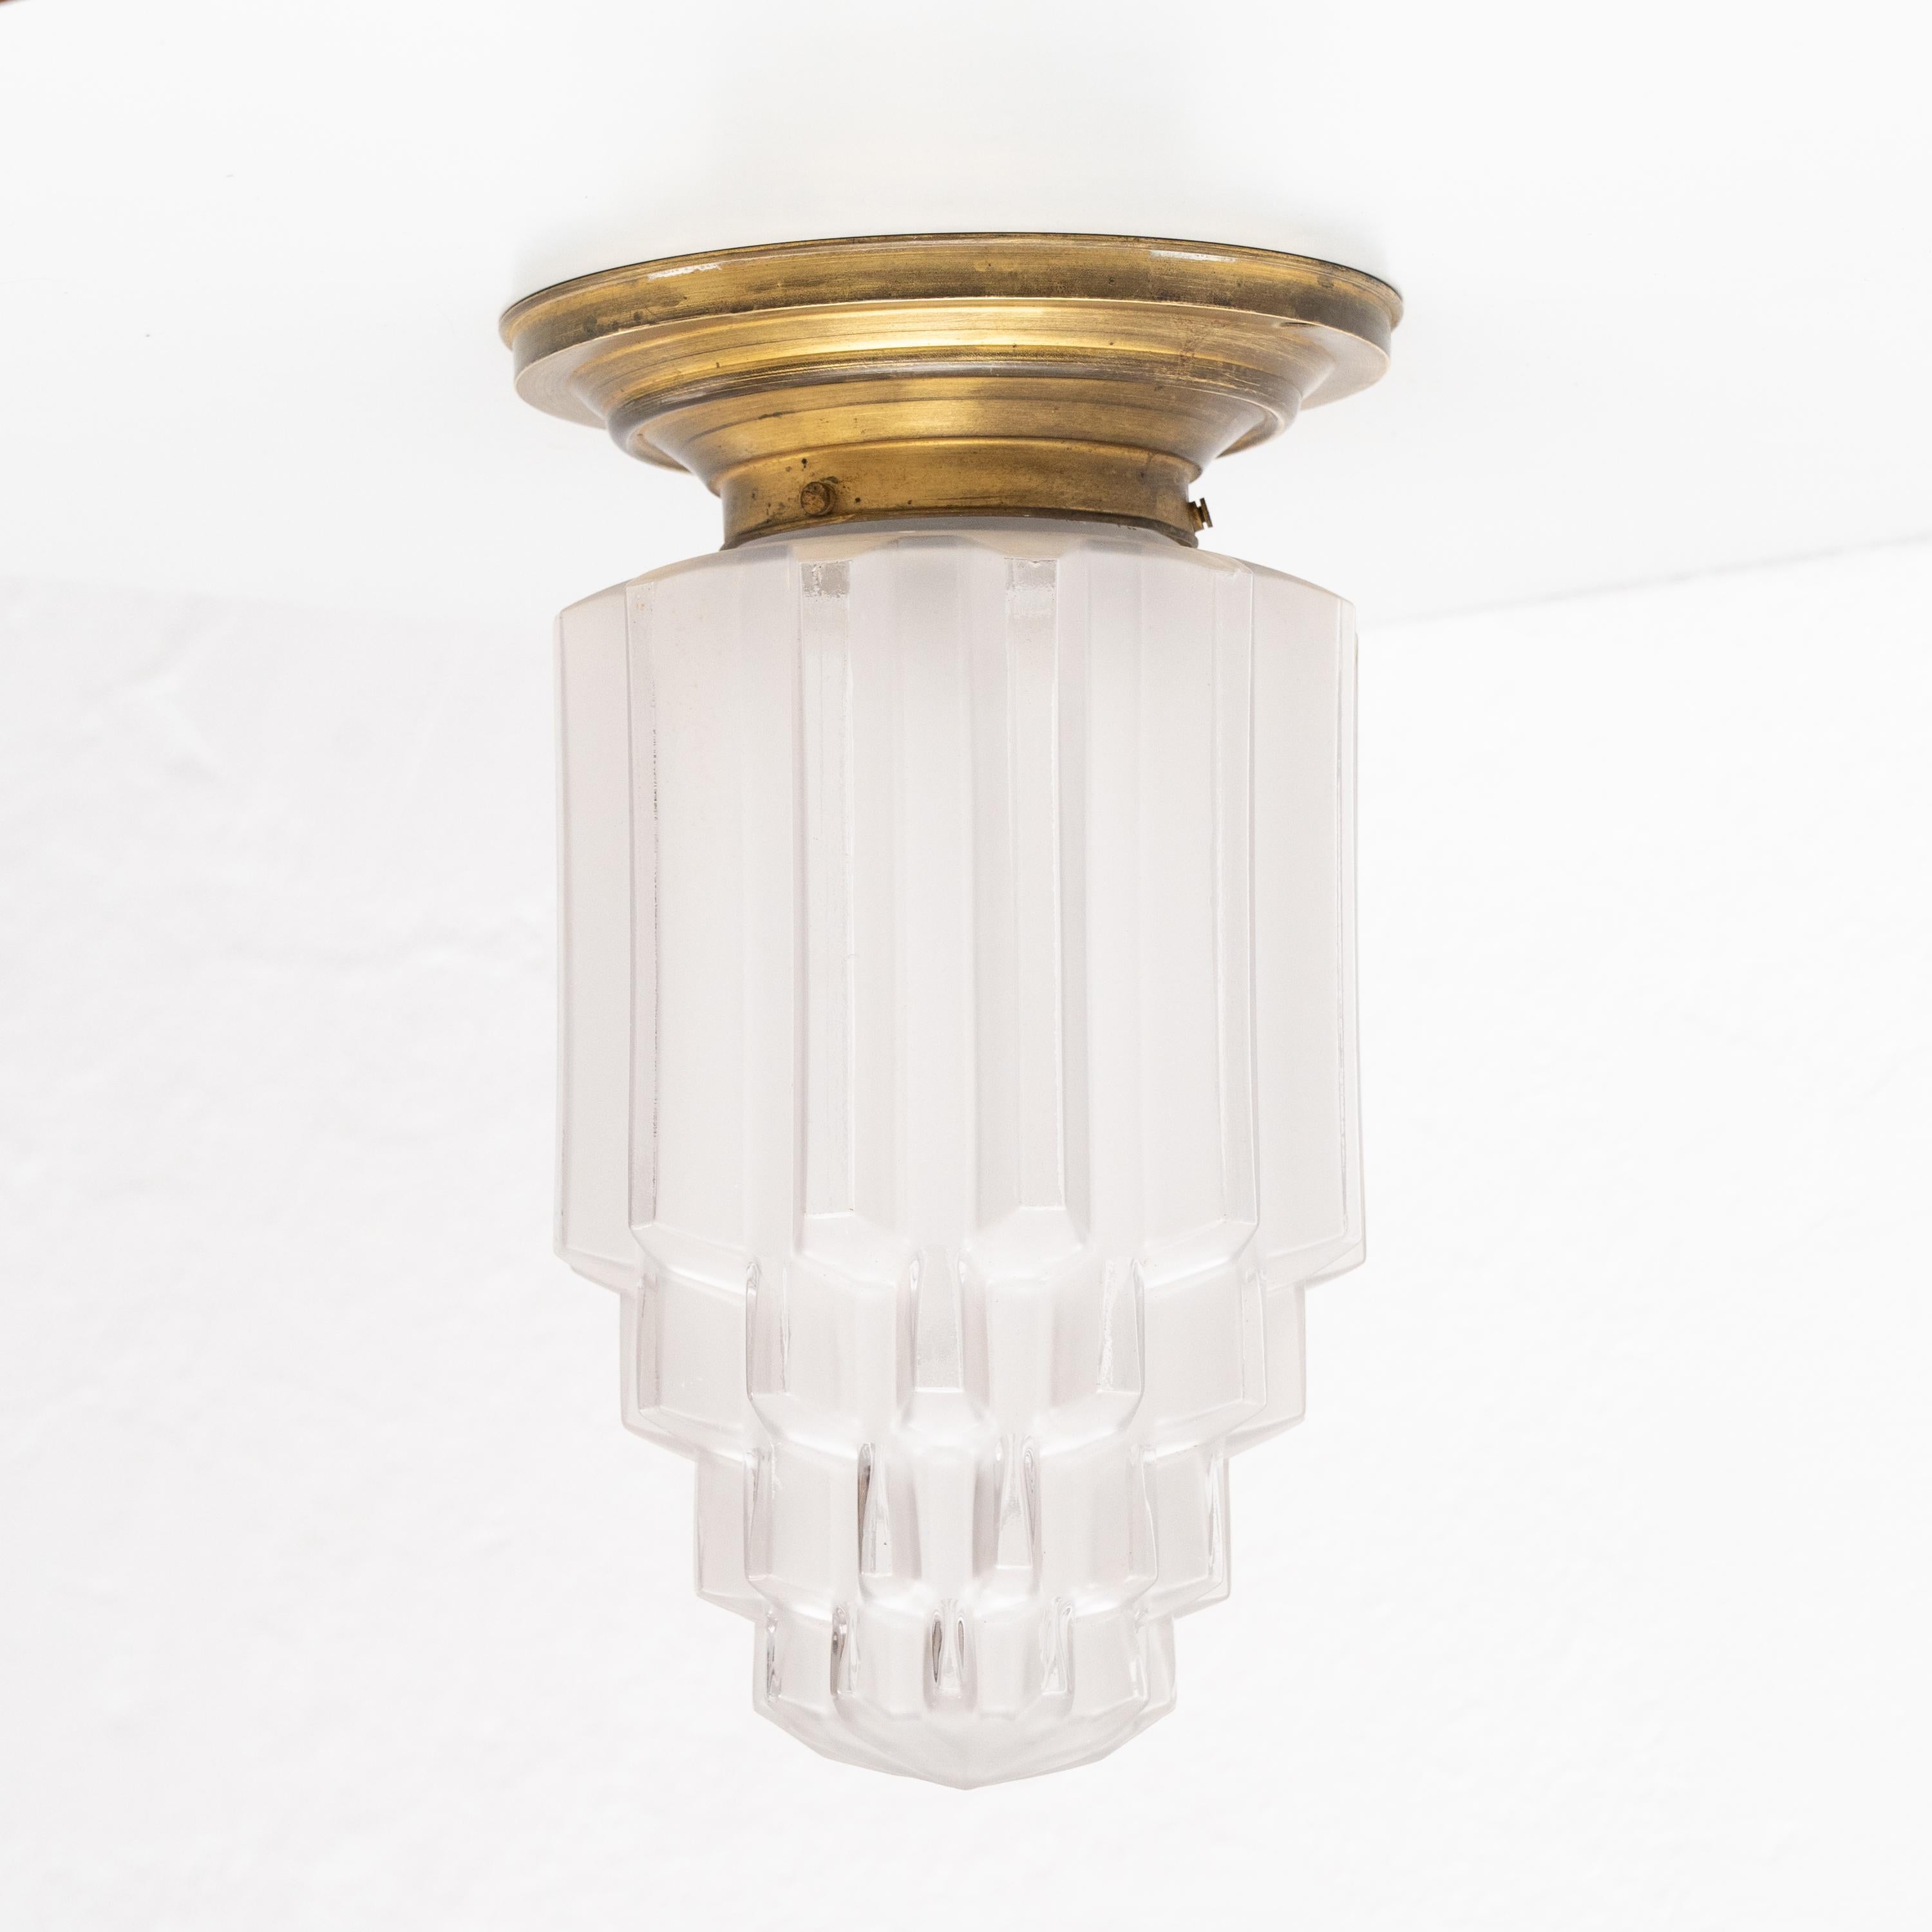 Vintage Art Deco Brass and Glass Ceiling Lamp, circa 1940 For Sale 7